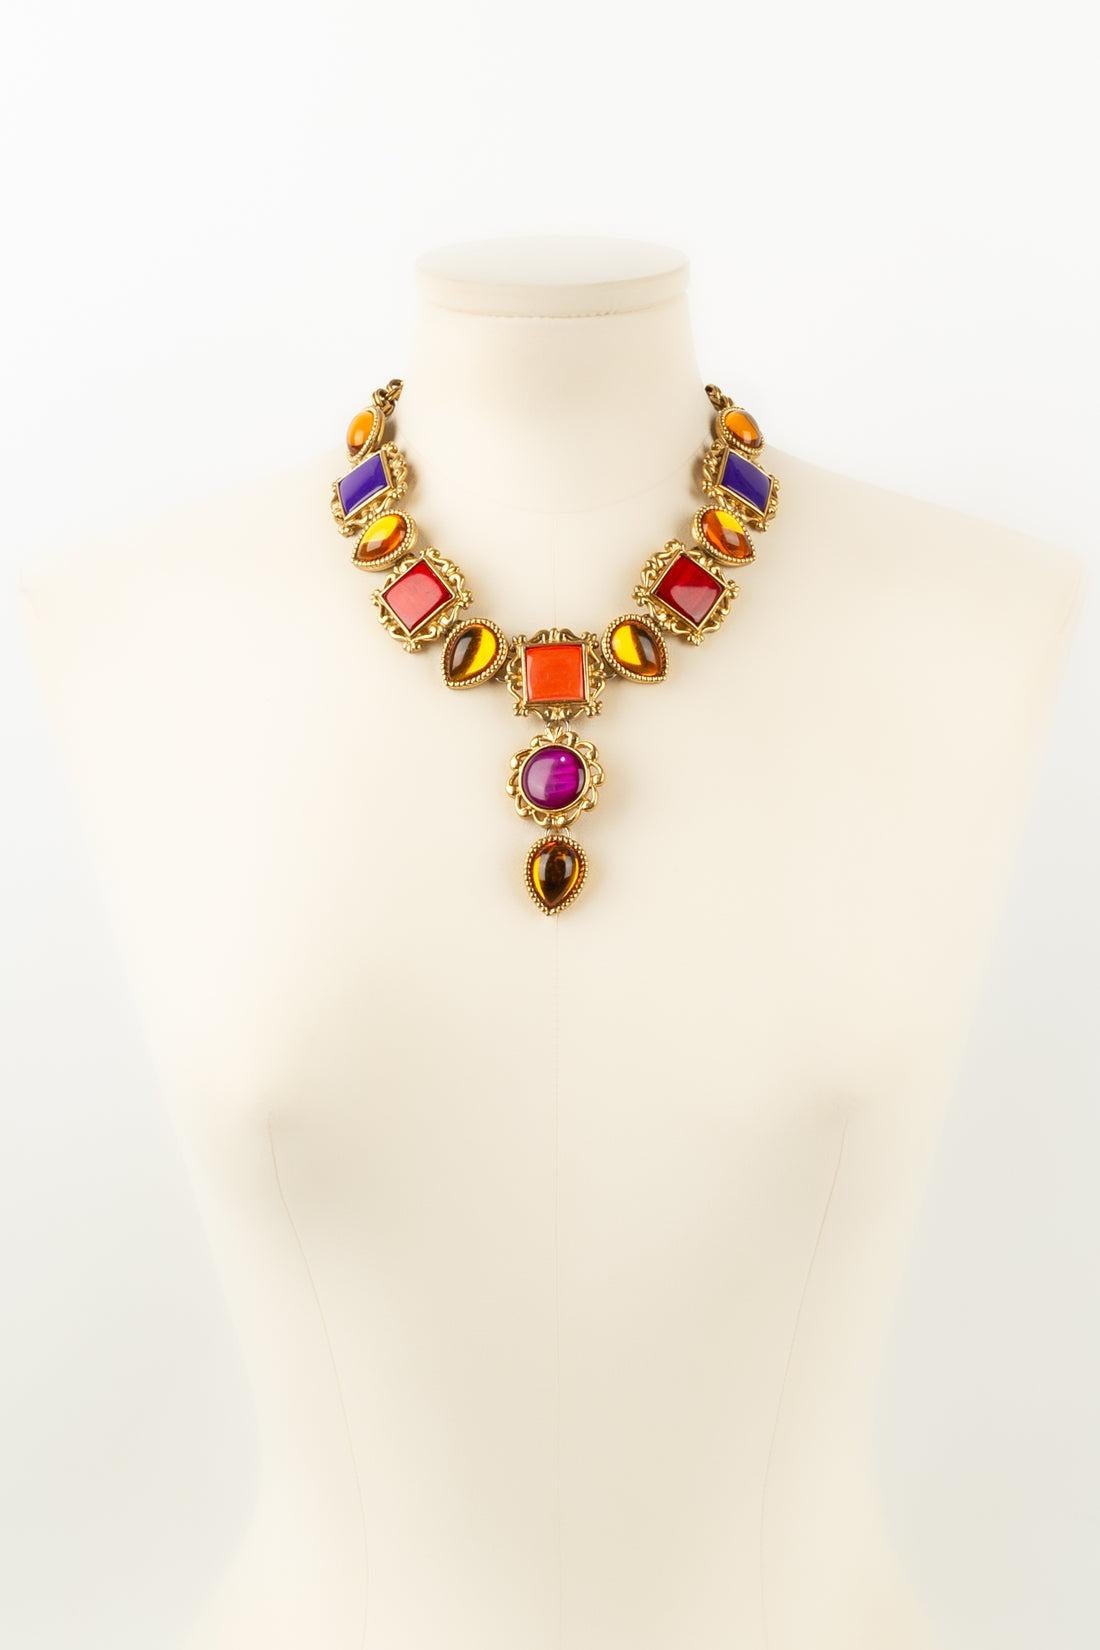 Yves Saint Laurent - (Made in France) Necklace in gold-plated metal and multicolored resin.

Additional information:
Condition: Very good condition
Dimensions: Length: from 45 cm to 49 cm

Seller Reference: BC97